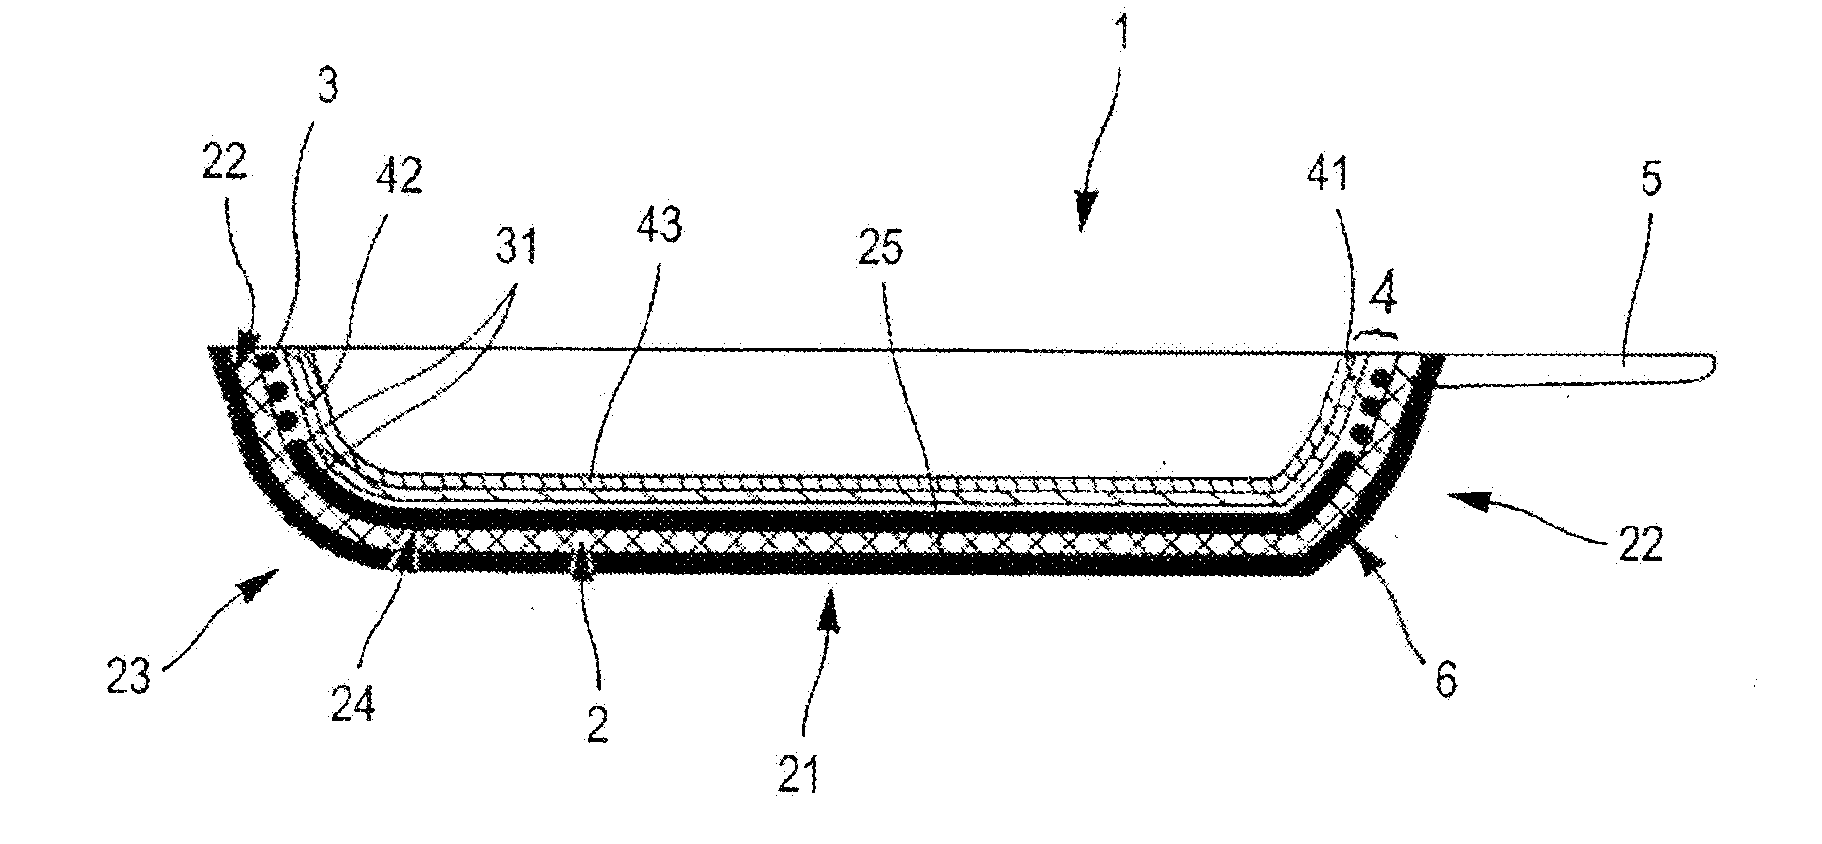 Cooking Utensil Comprising a Hard Base Made from Ceramic and/or Metal and/or Polymer Material and a Nonstick Coating Containing a Fluorocarbon Resin